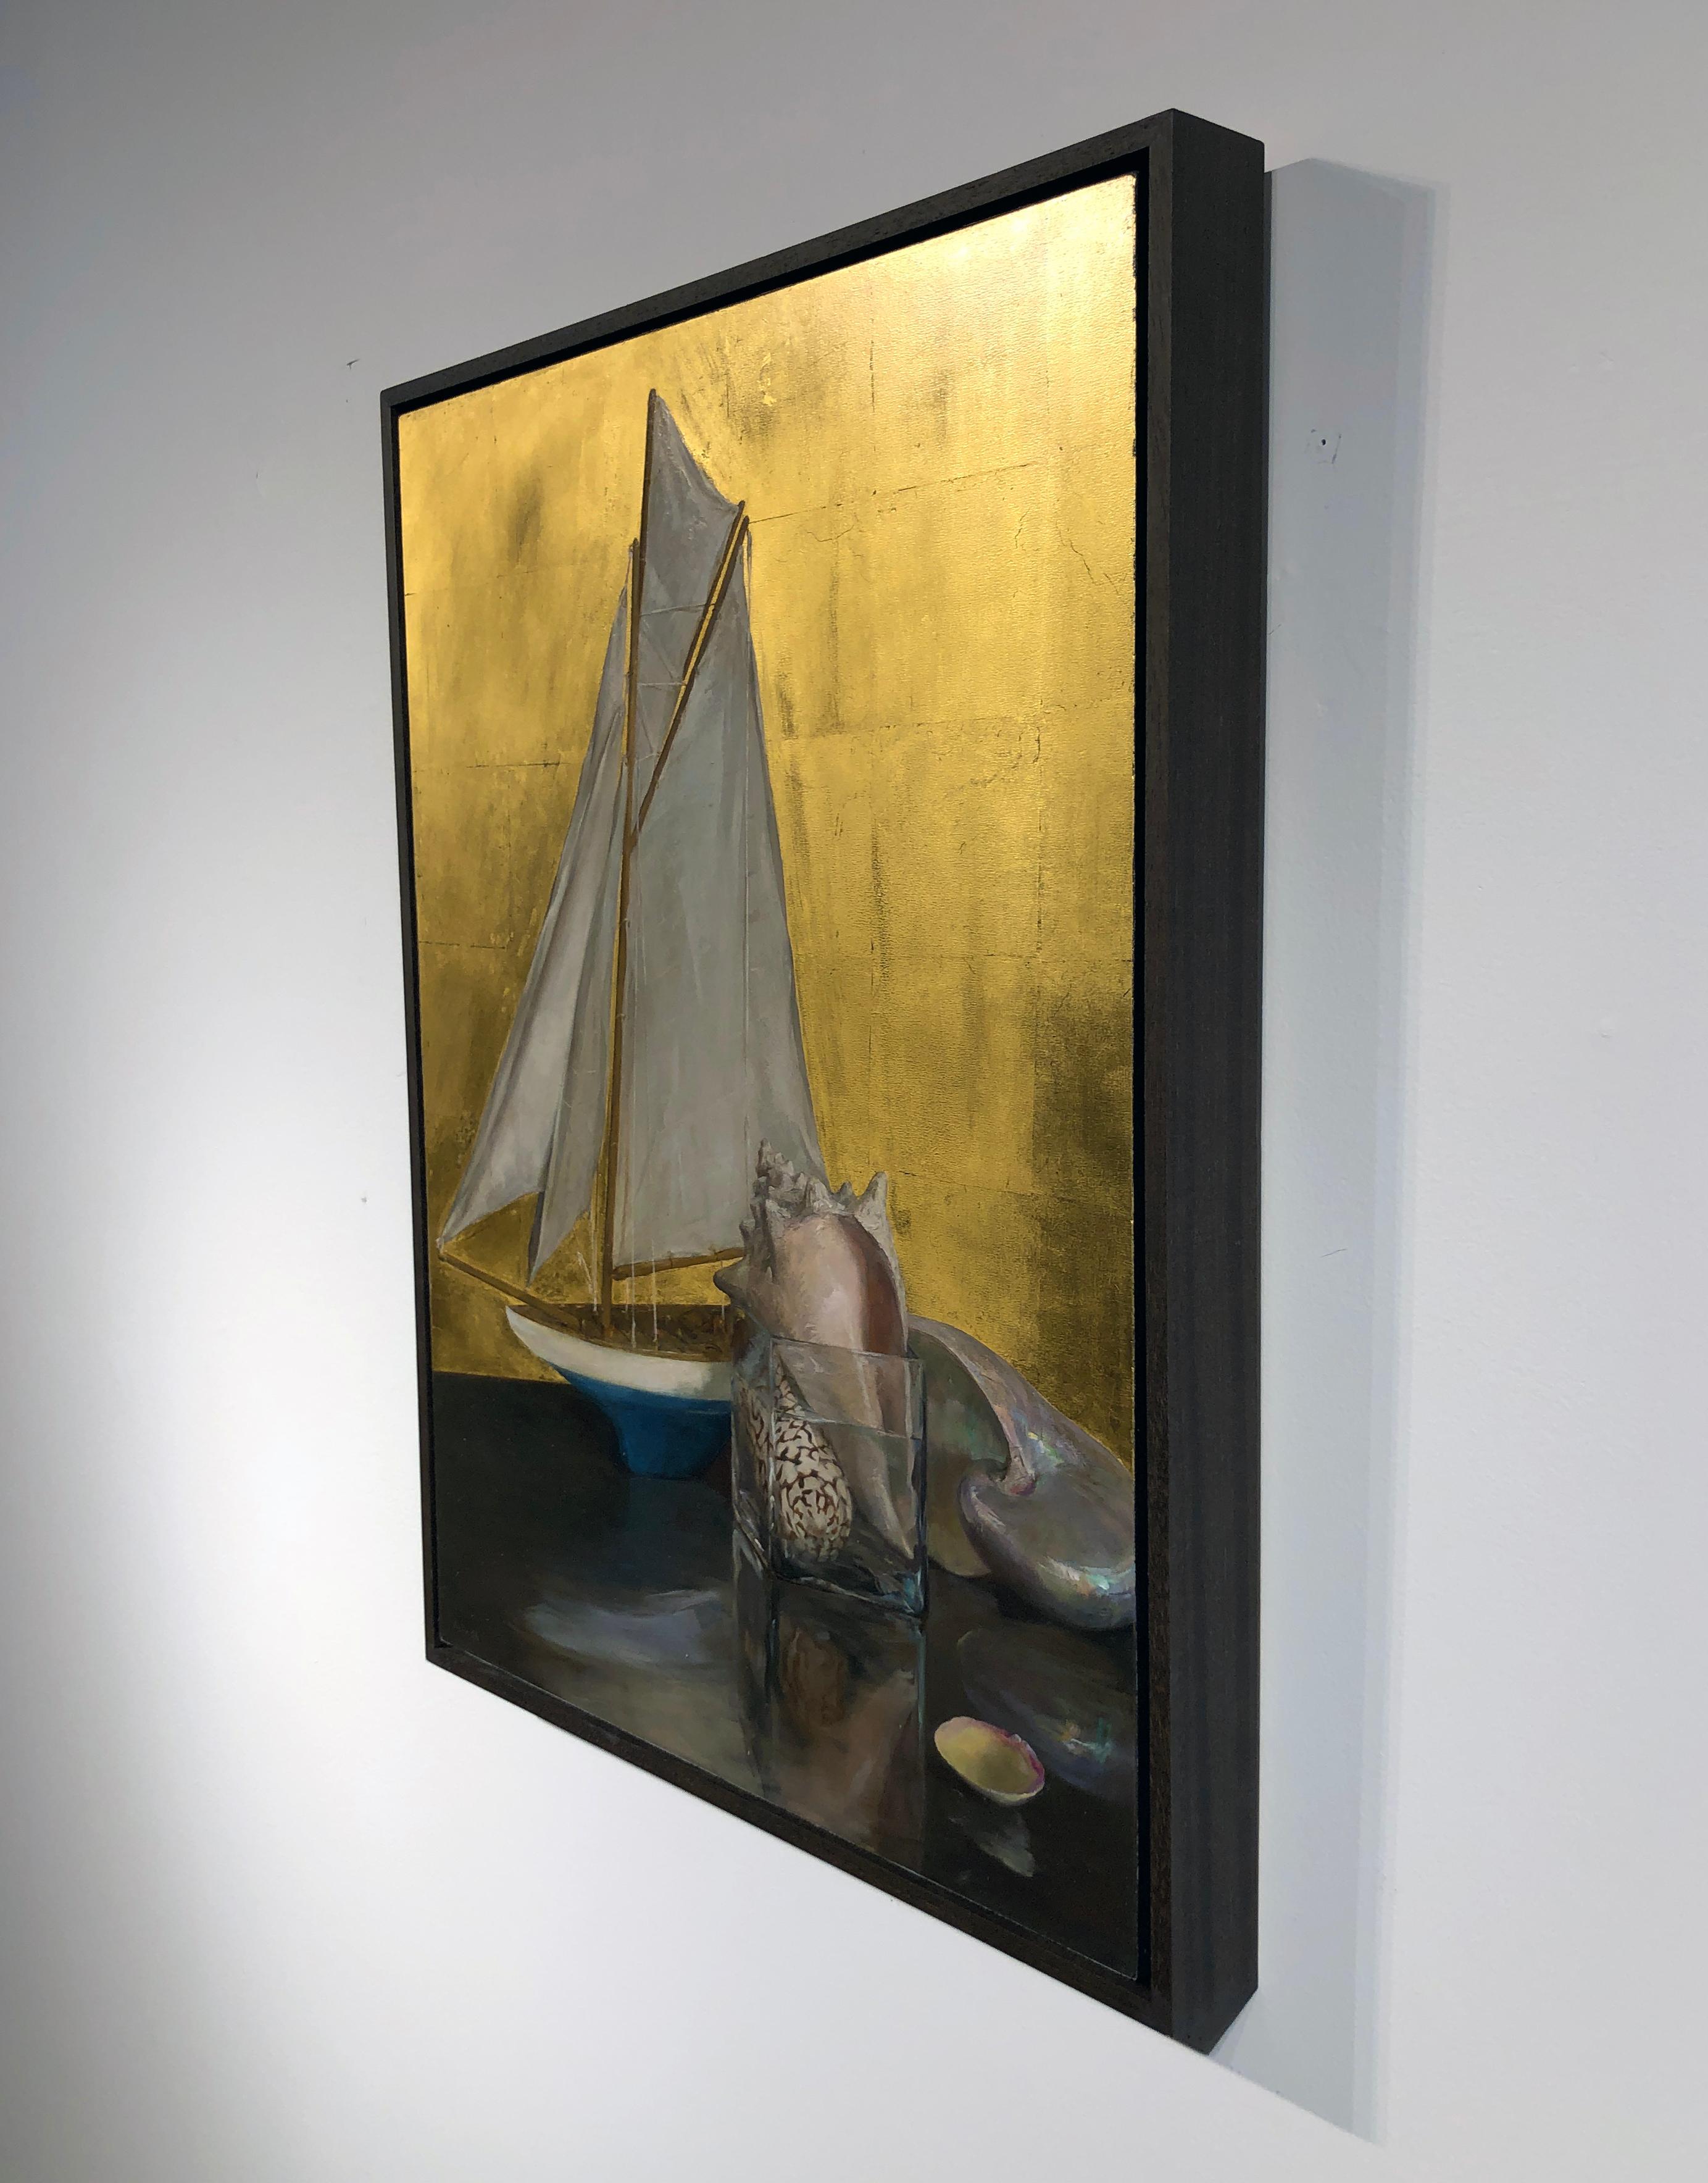 Gorgeous gold leaf warms the background of this nautically themed still life.  A model sailboat and a collection of seashells are arranged atop a reflective table.  This masterful painting by Helen Oh evokes warm summer days and walks across the